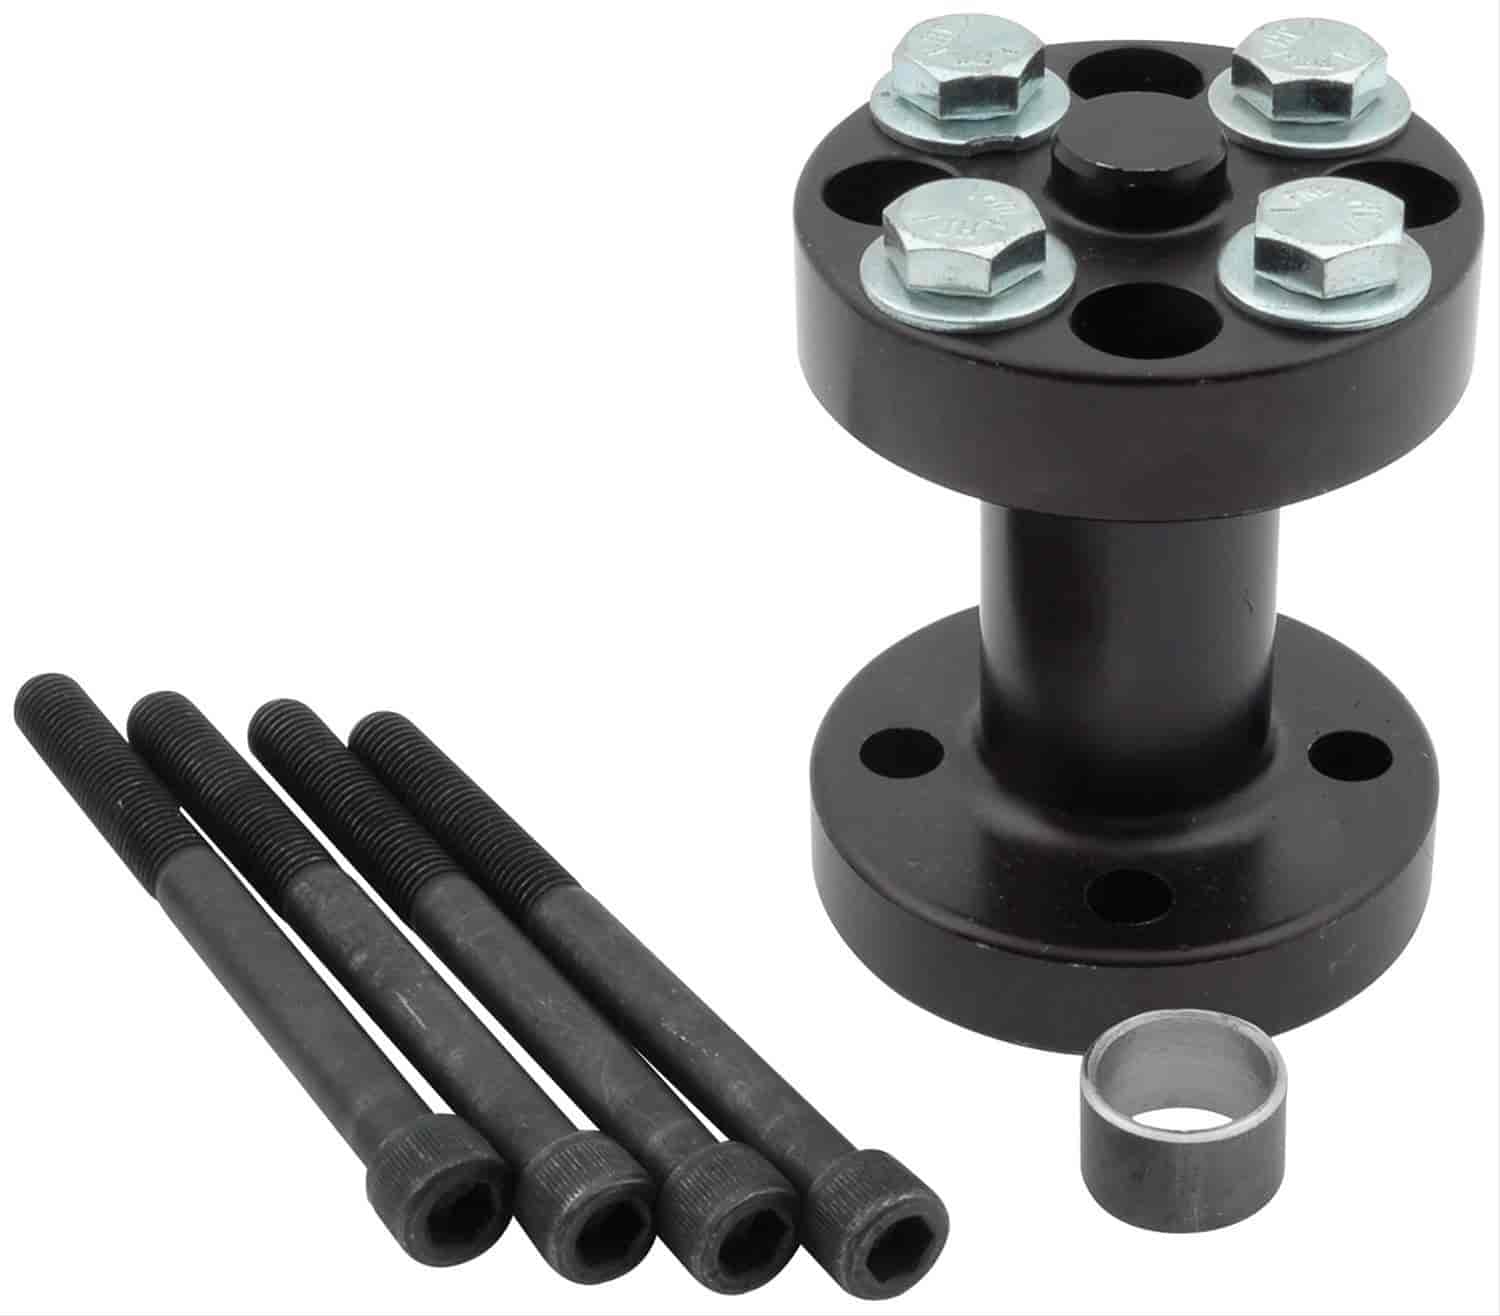 Aluminum Fan Spacer Kit 3-1/2" Spaced *Note: Spacers work with 1-3/4" bolt circle flanges only.